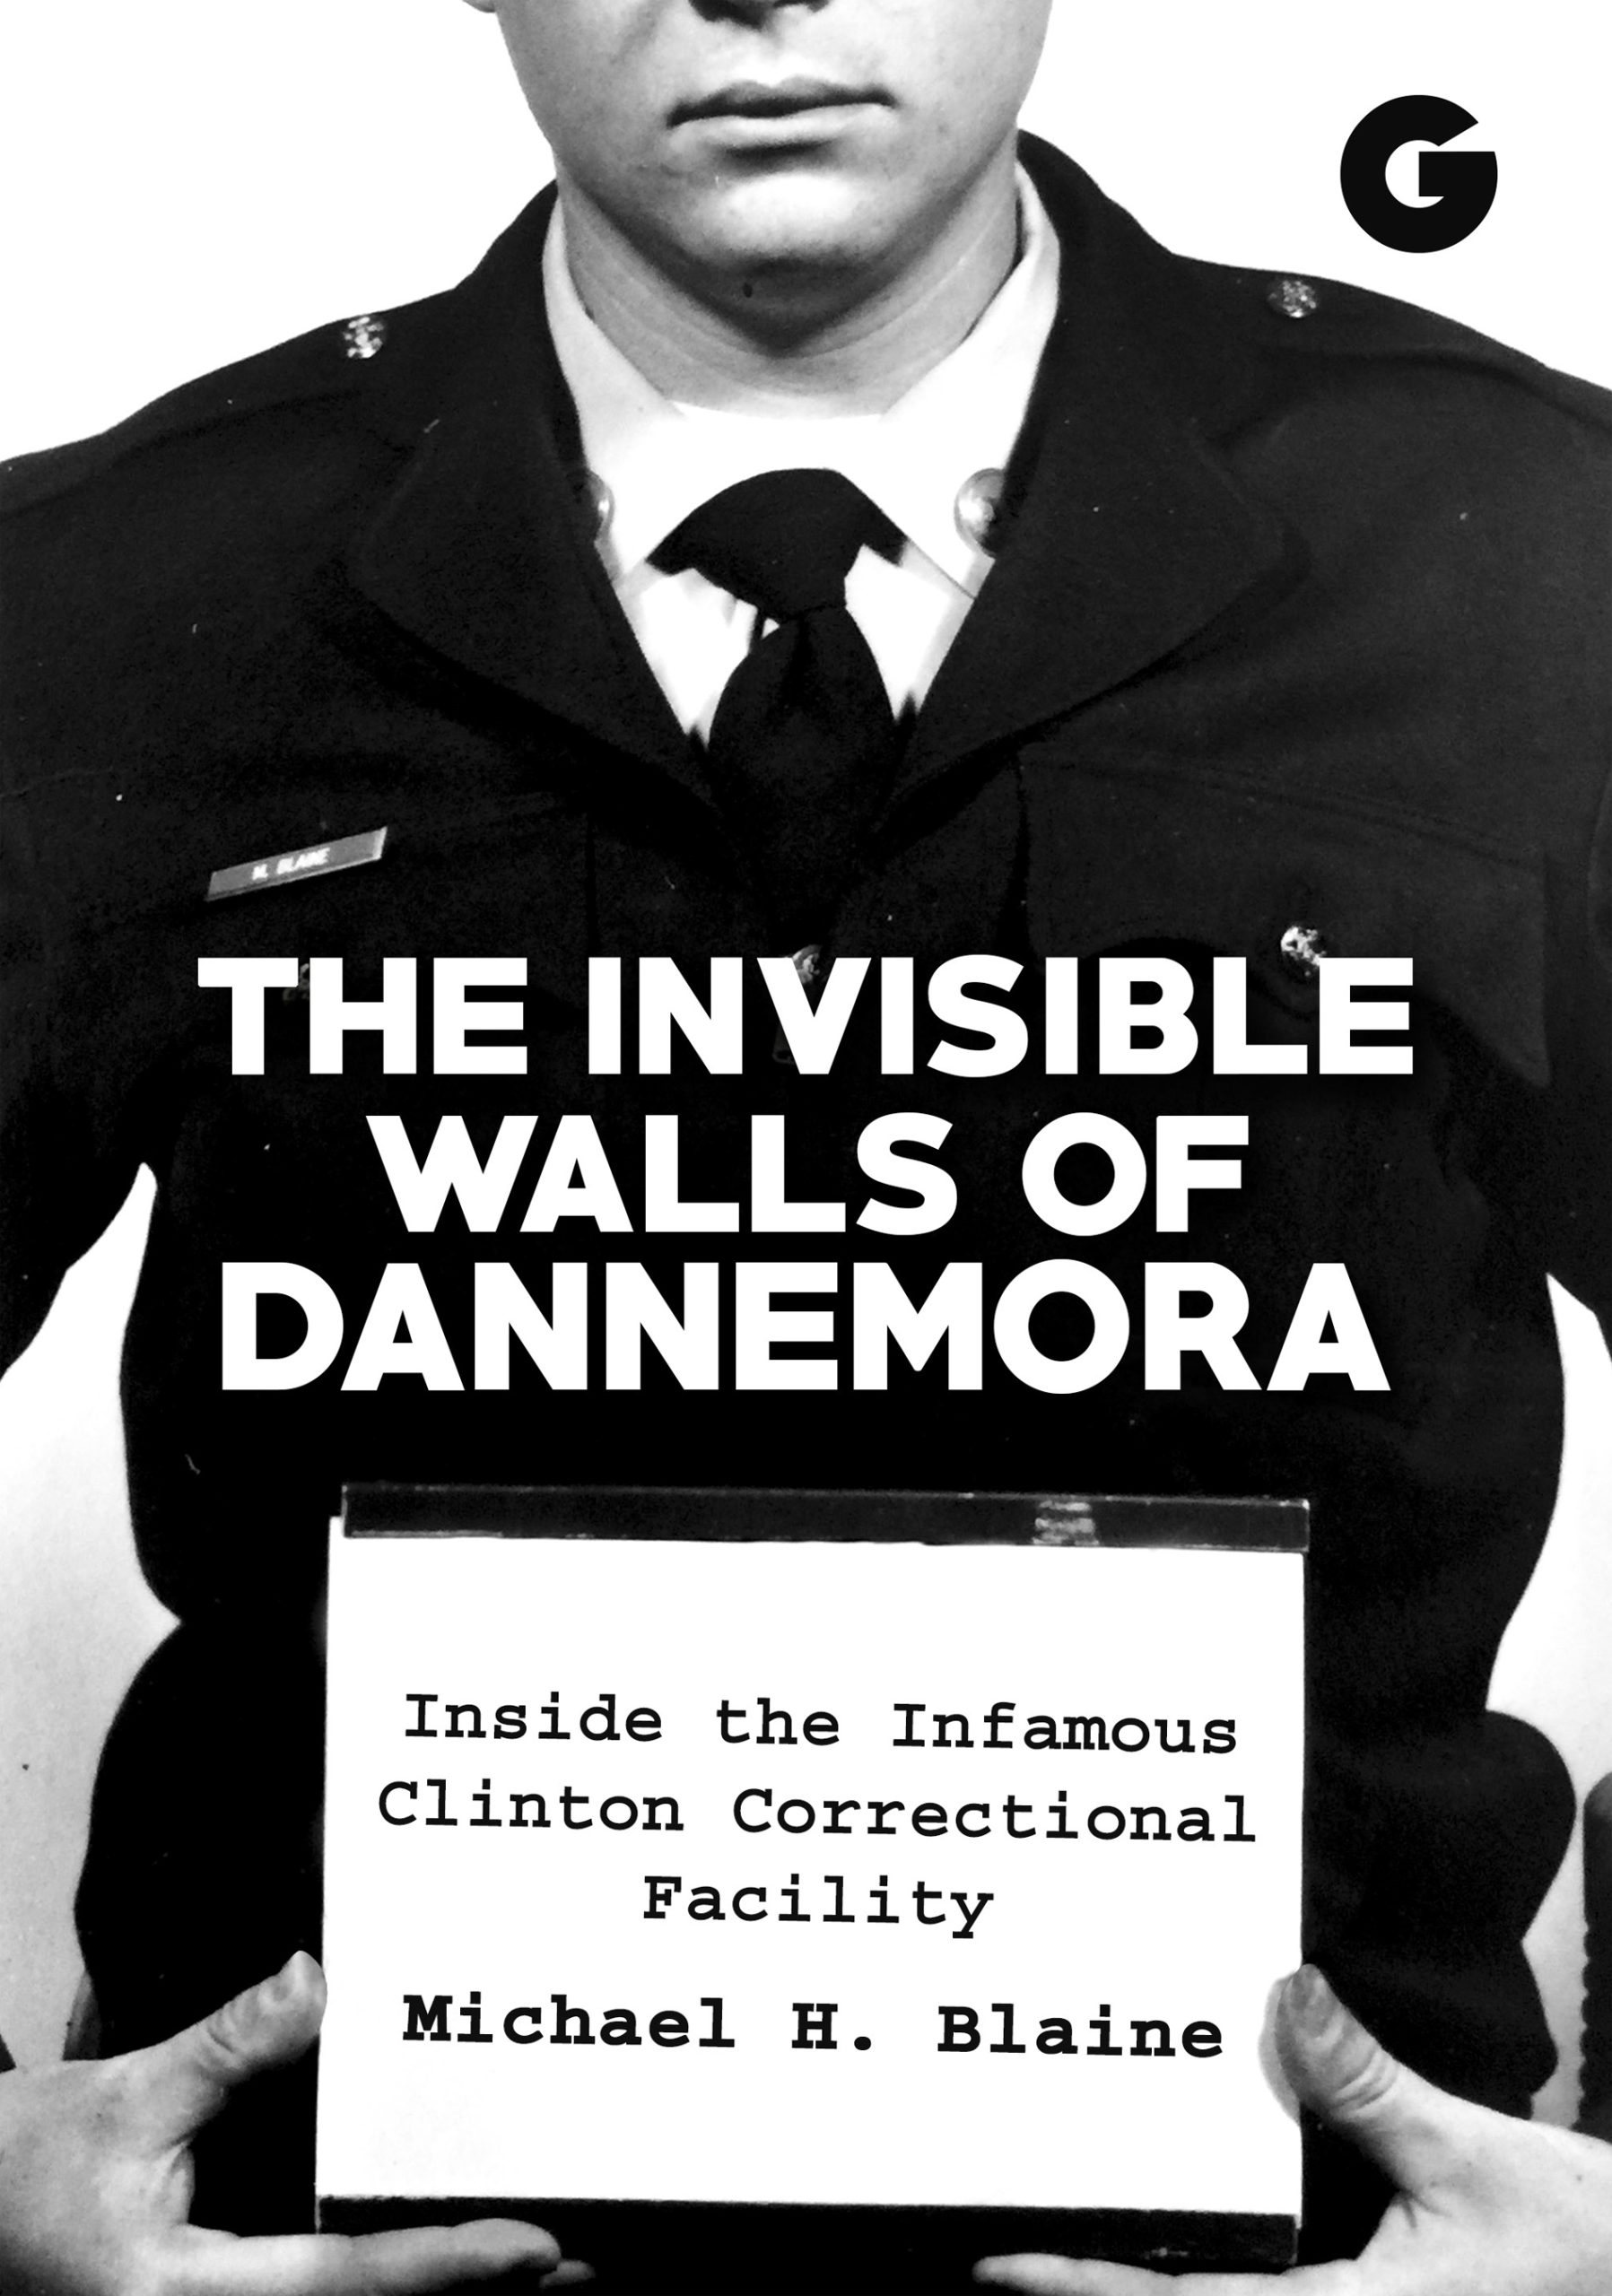 BOOK REVIEW: The Invisible Walls Of Dannemora